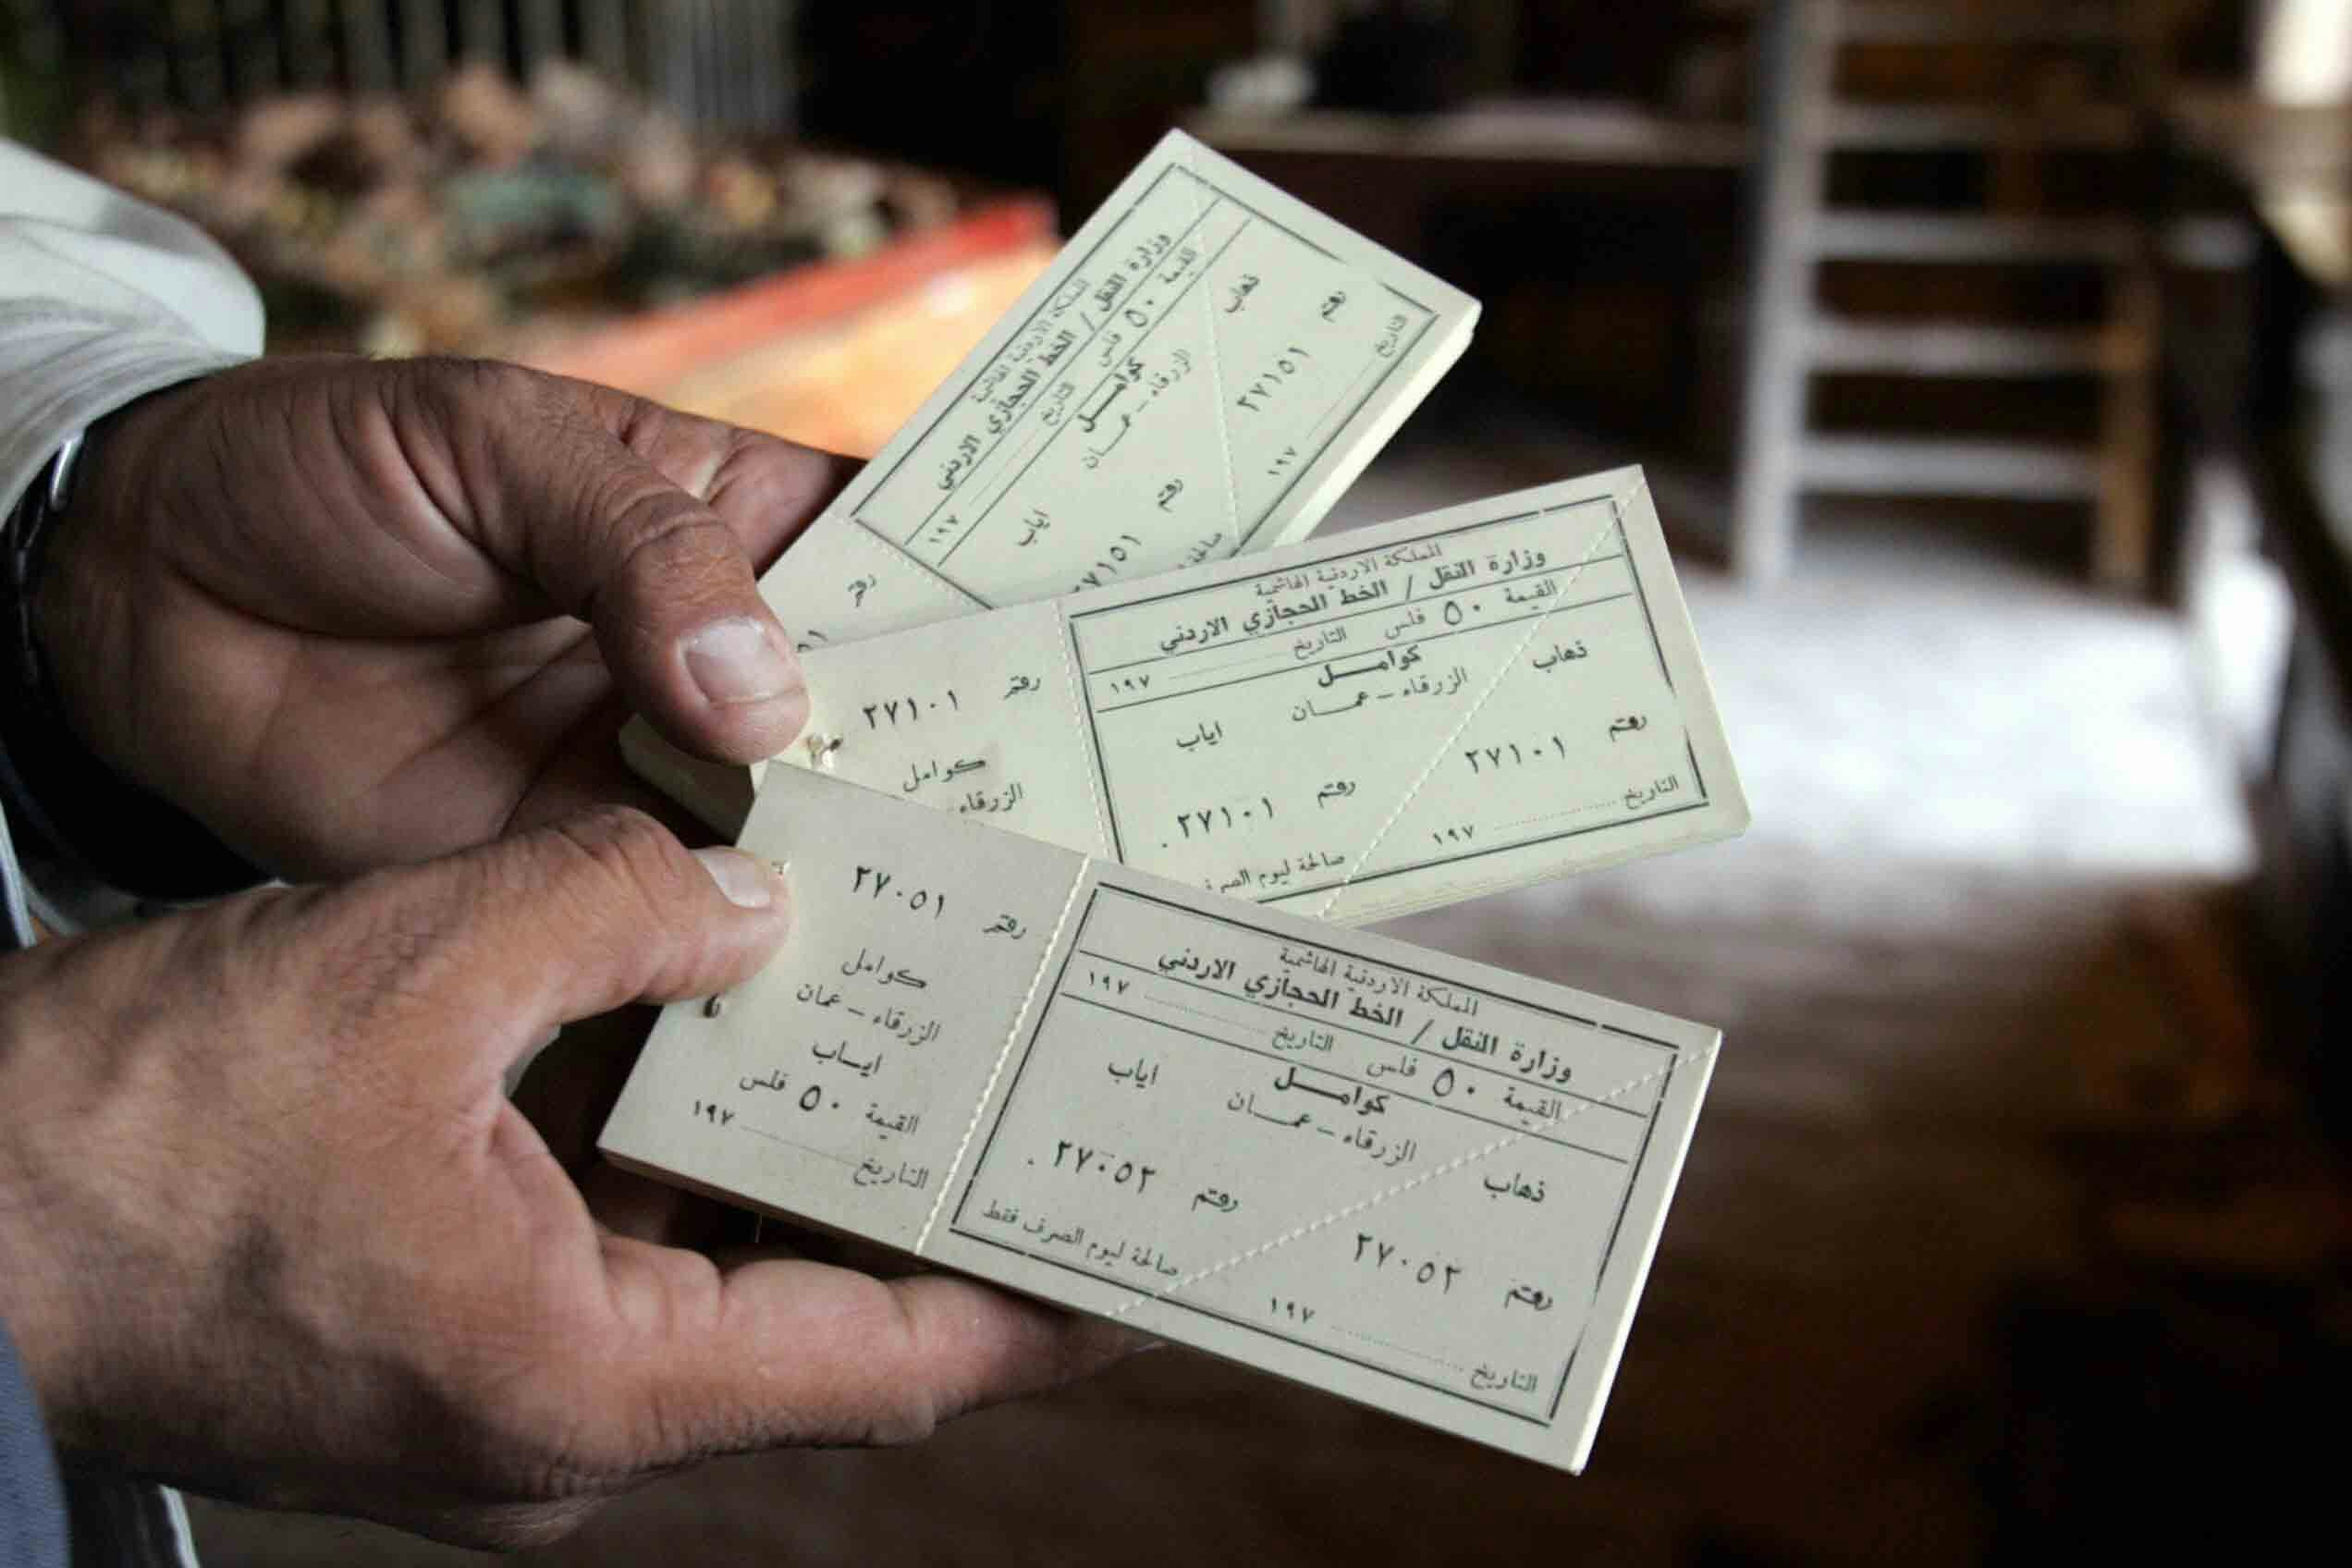 A man holds boarding tickets at Amman's Hijaz railway station in 2009